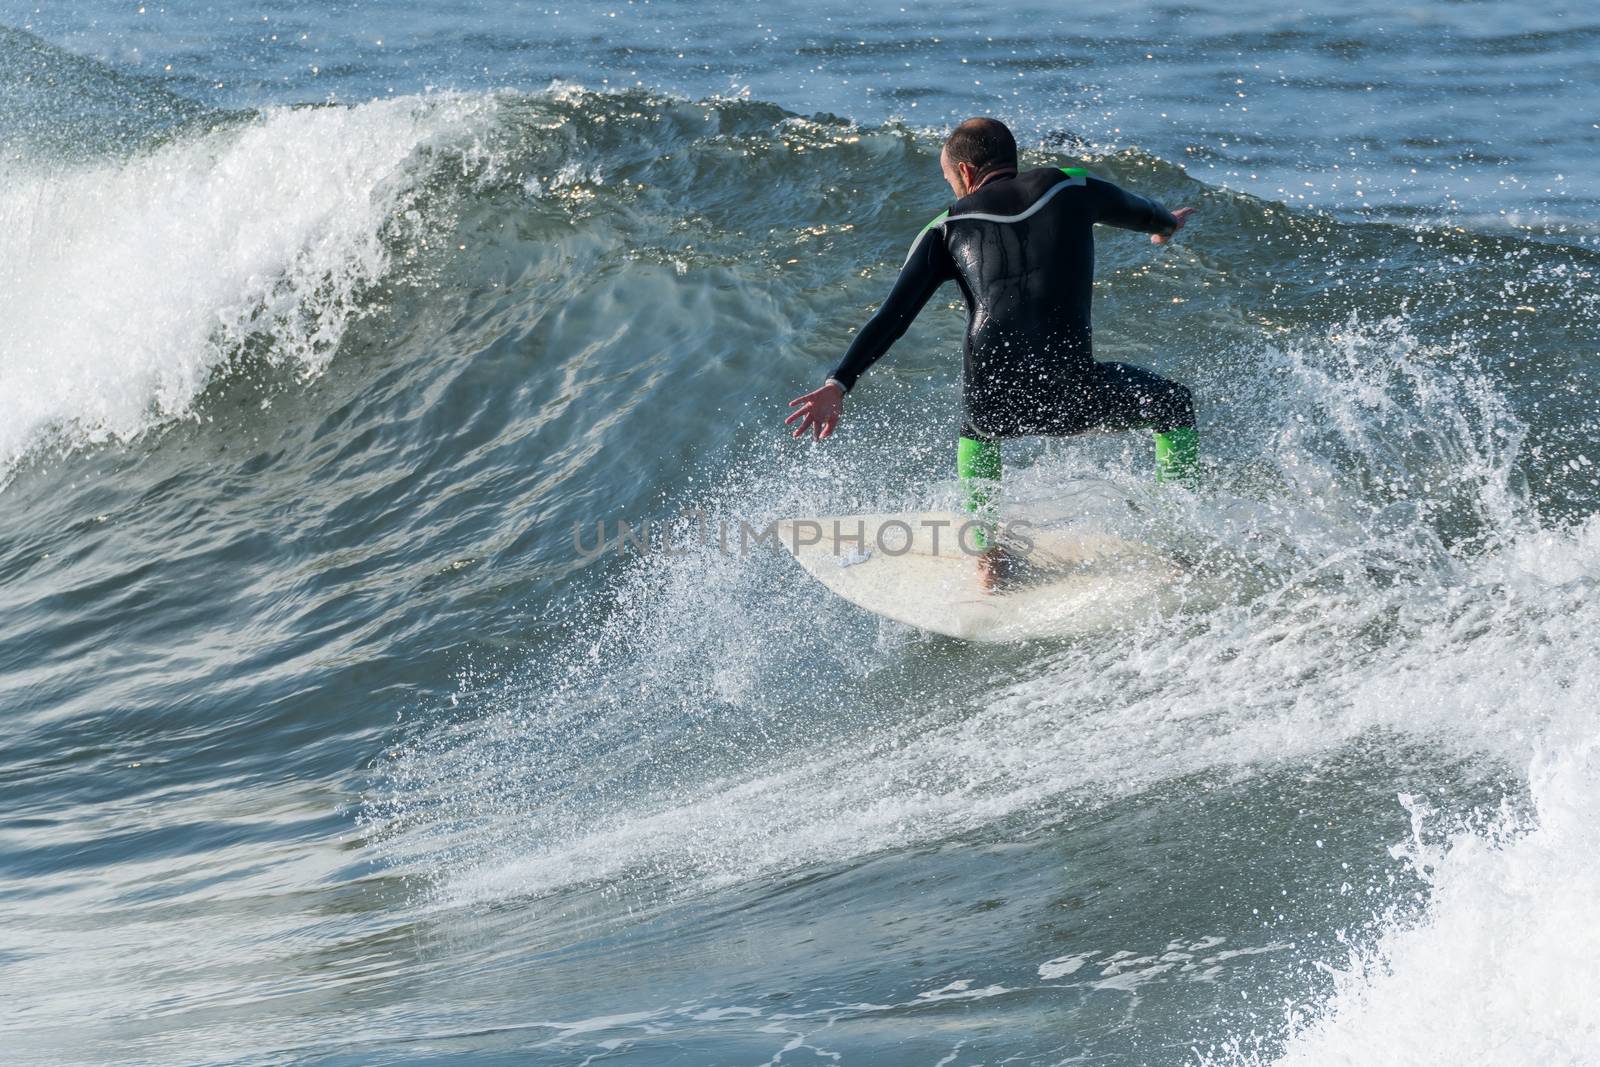 Surfer in action on the ocean waves on a sunny day.